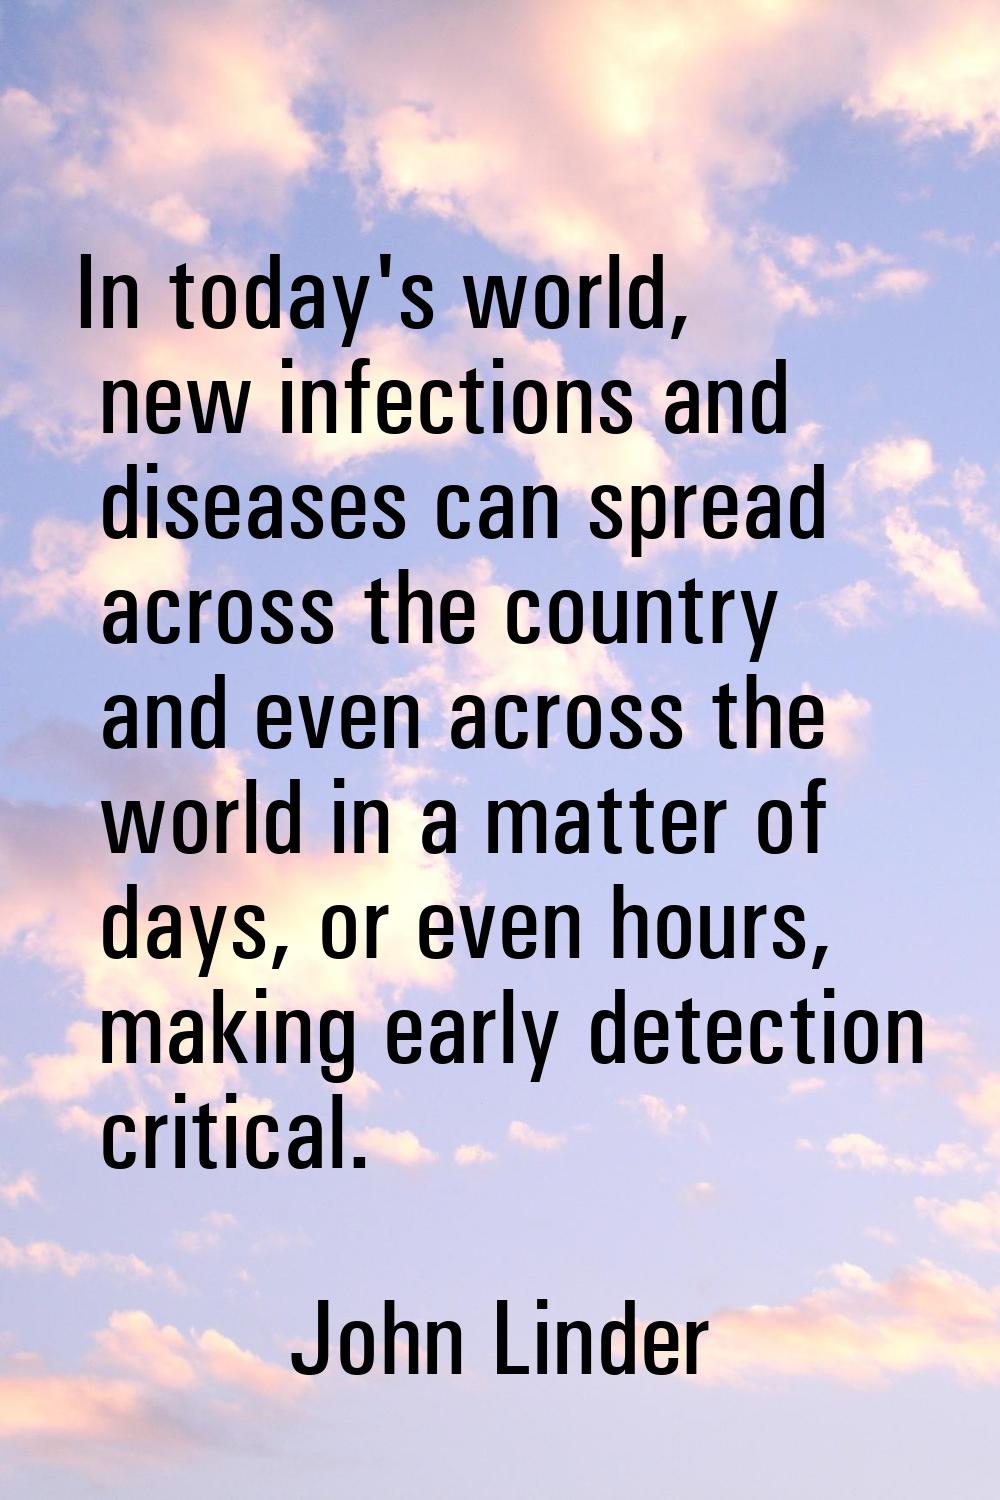 In today's world, new infections and diseases can spread across the country and even across the wor